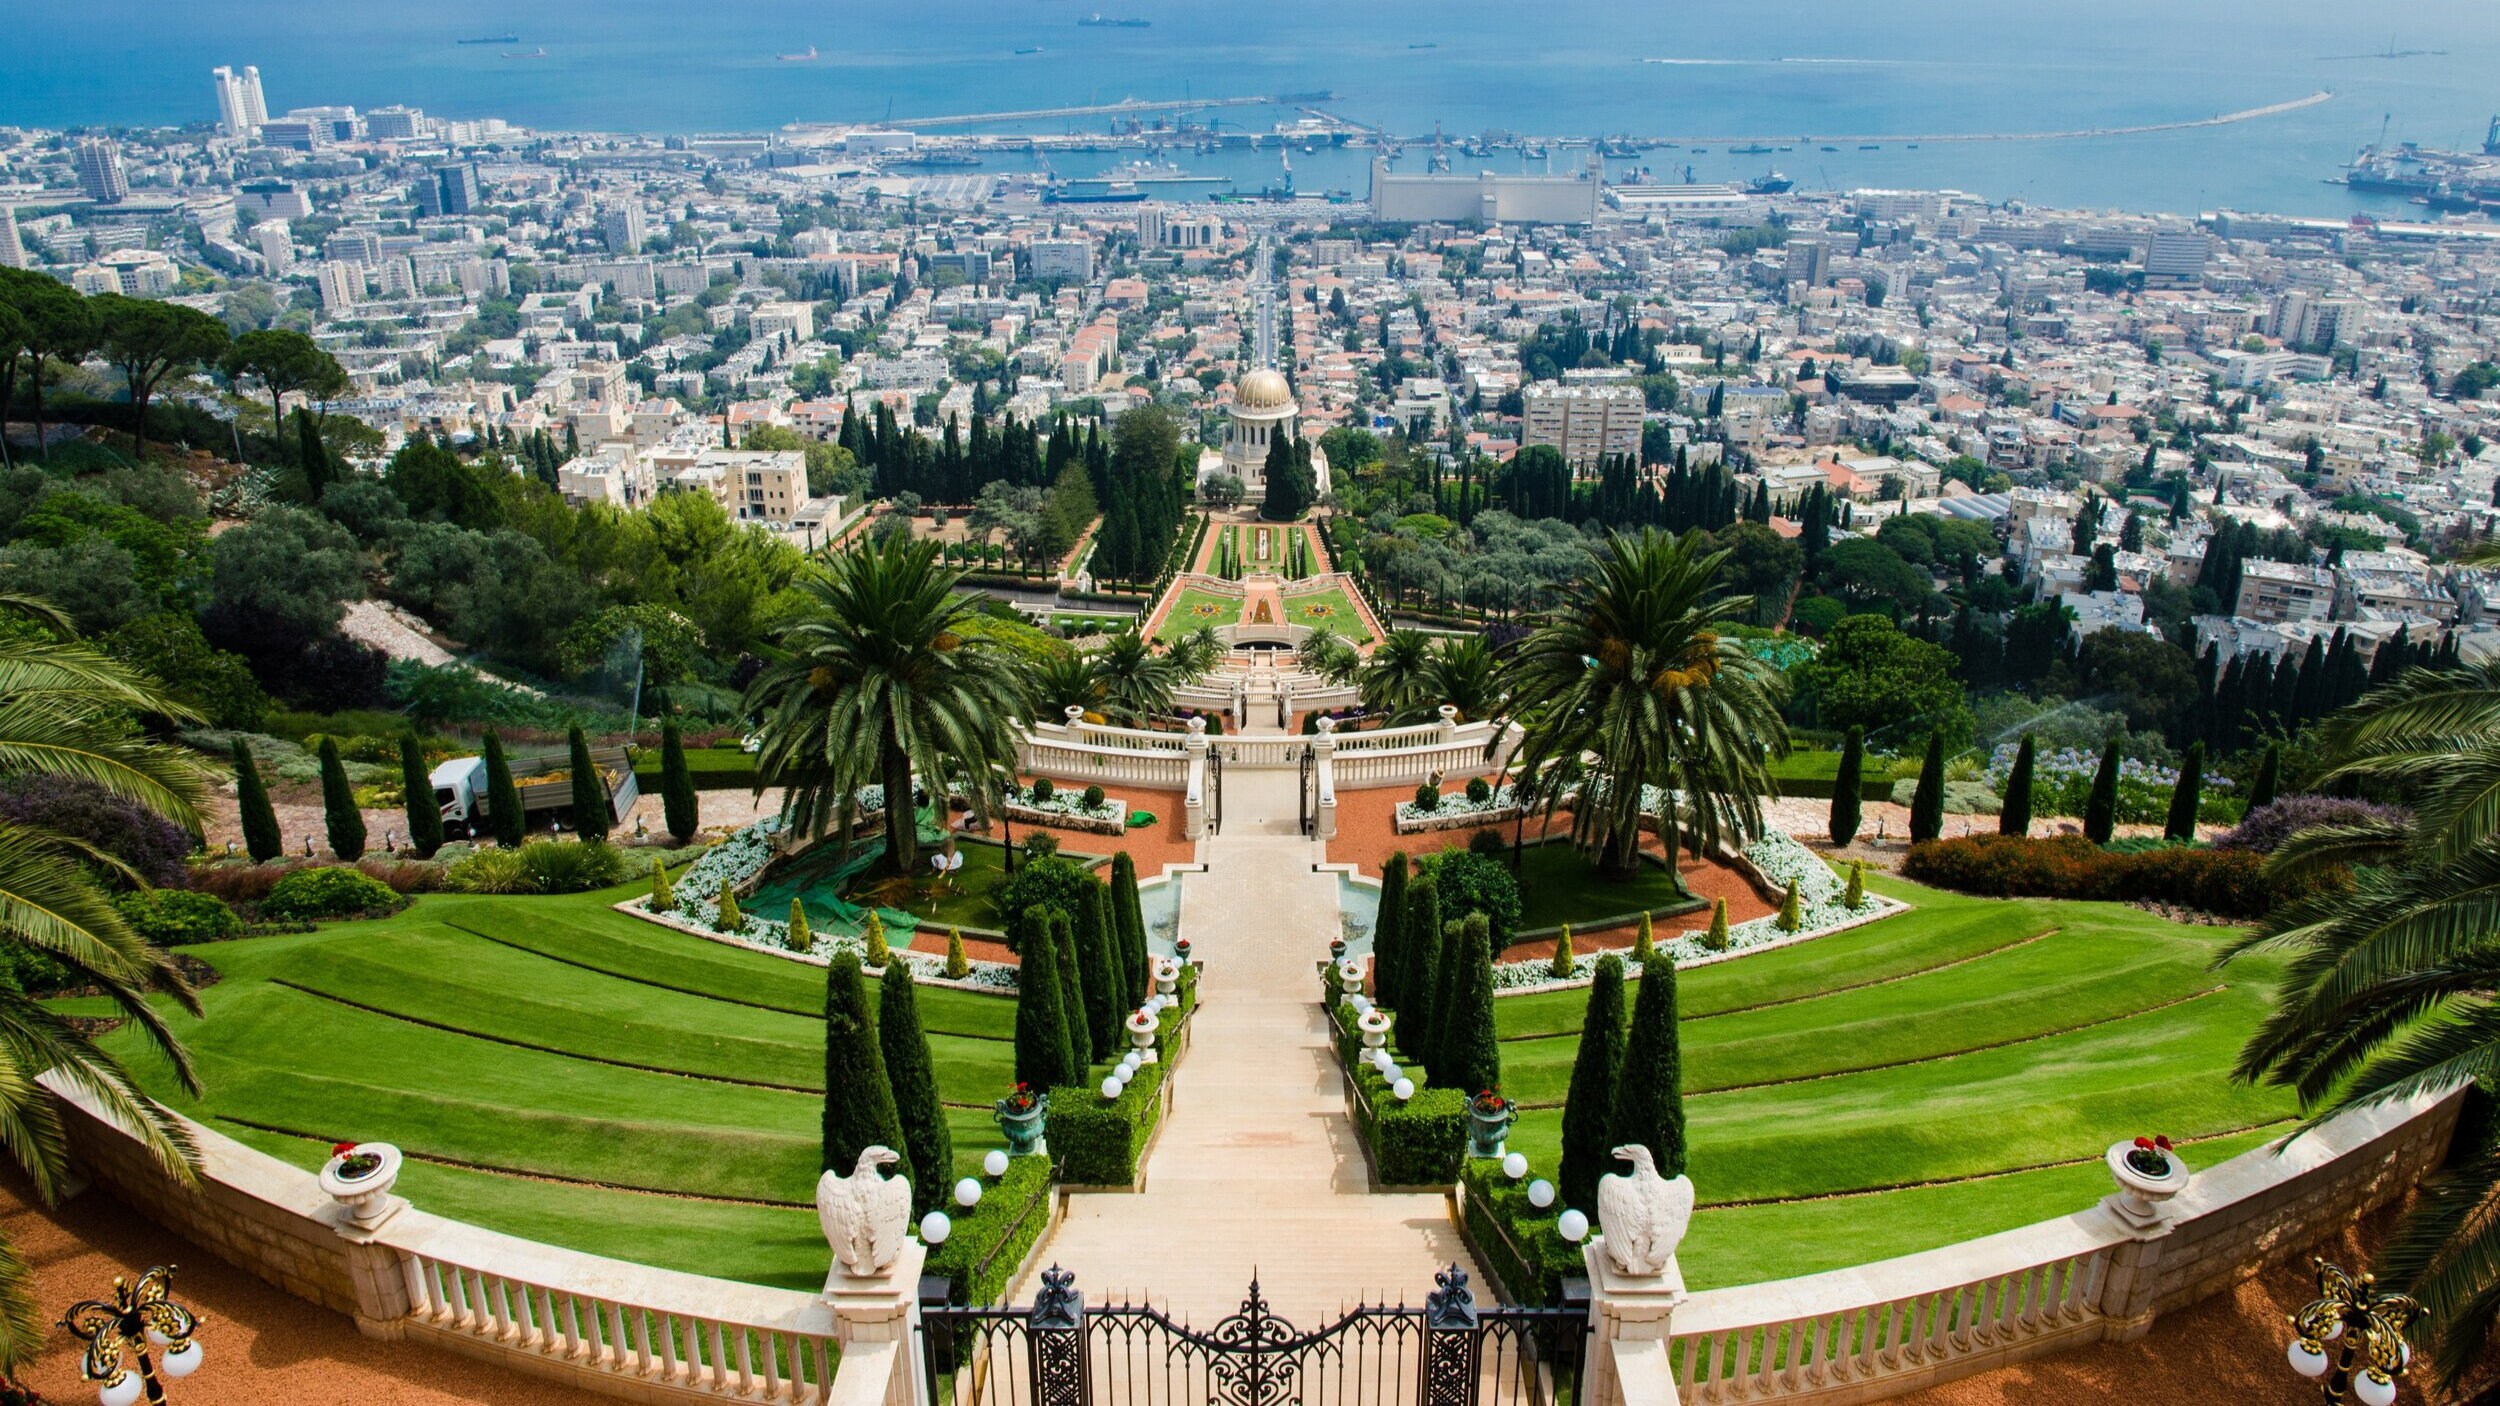 Photograph of Baha'i Gardens, Haifa. A panoramic view of hedge gardens, leading down to the city and beyond to the sea